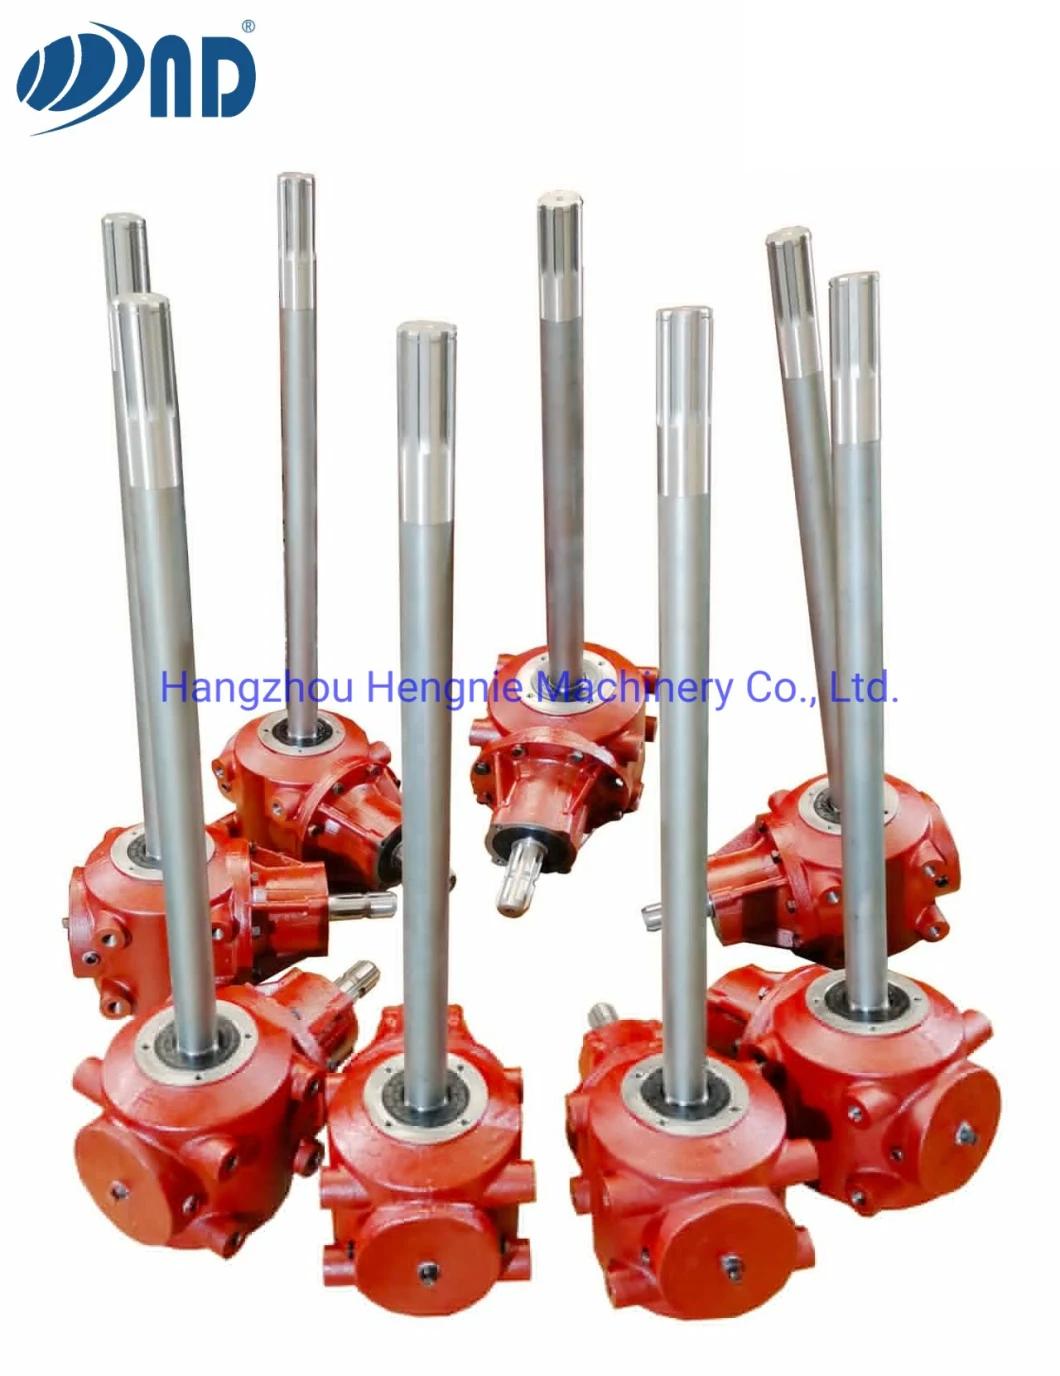 Factory Sales Directly Brand Agricultural Gearbox for Agriculture Subsoiler Rotator Gear Box Pto